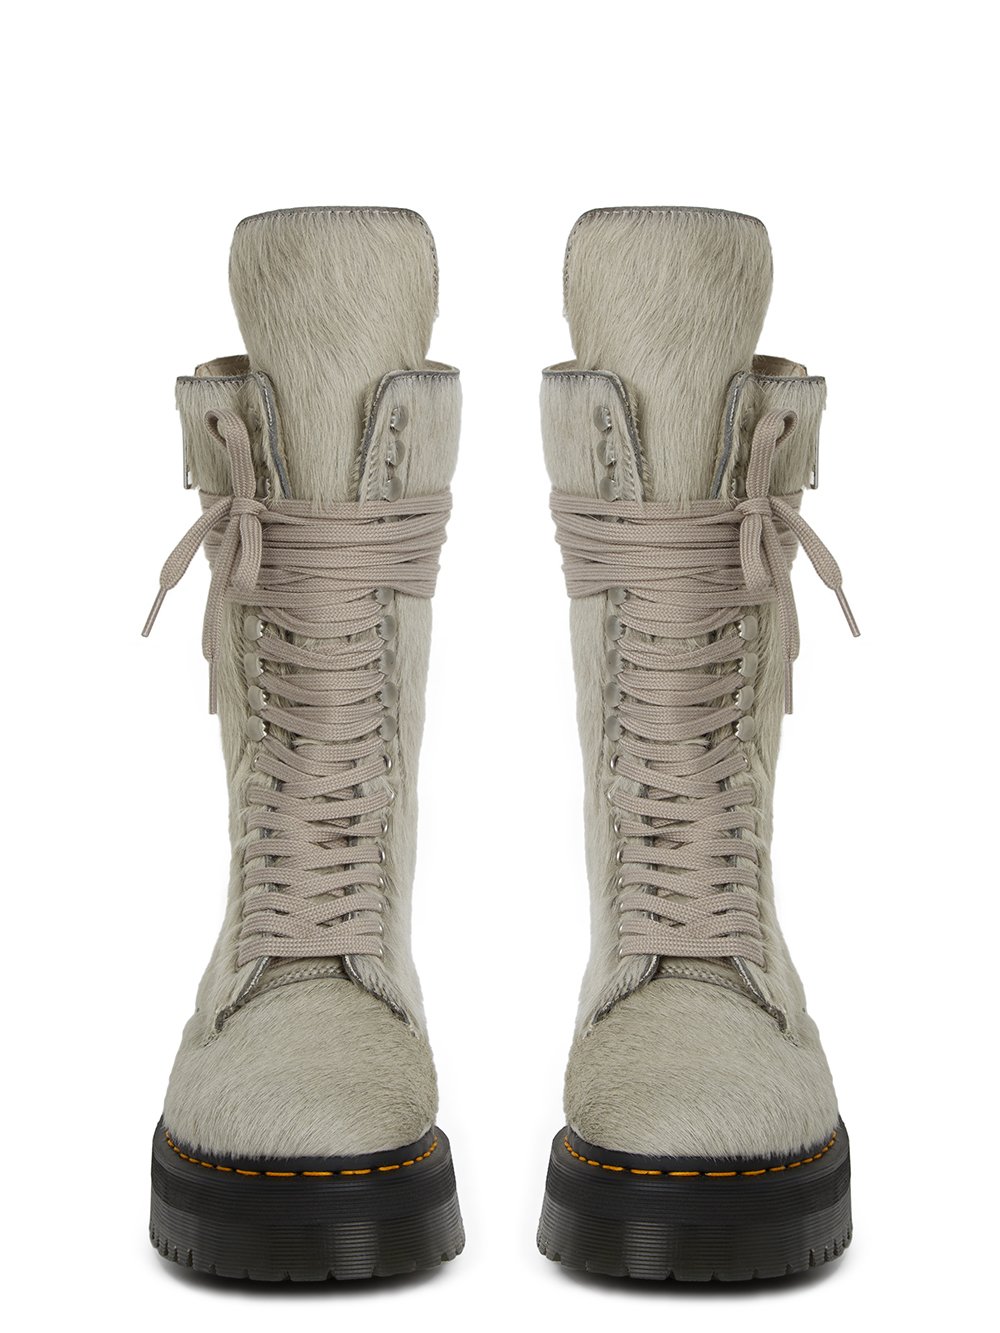 DR. MARTENS x RICK OWENS FW22 STROBE CALF LENGTH BOOT IN PEARL HAIR-ON COW LEATHER.  